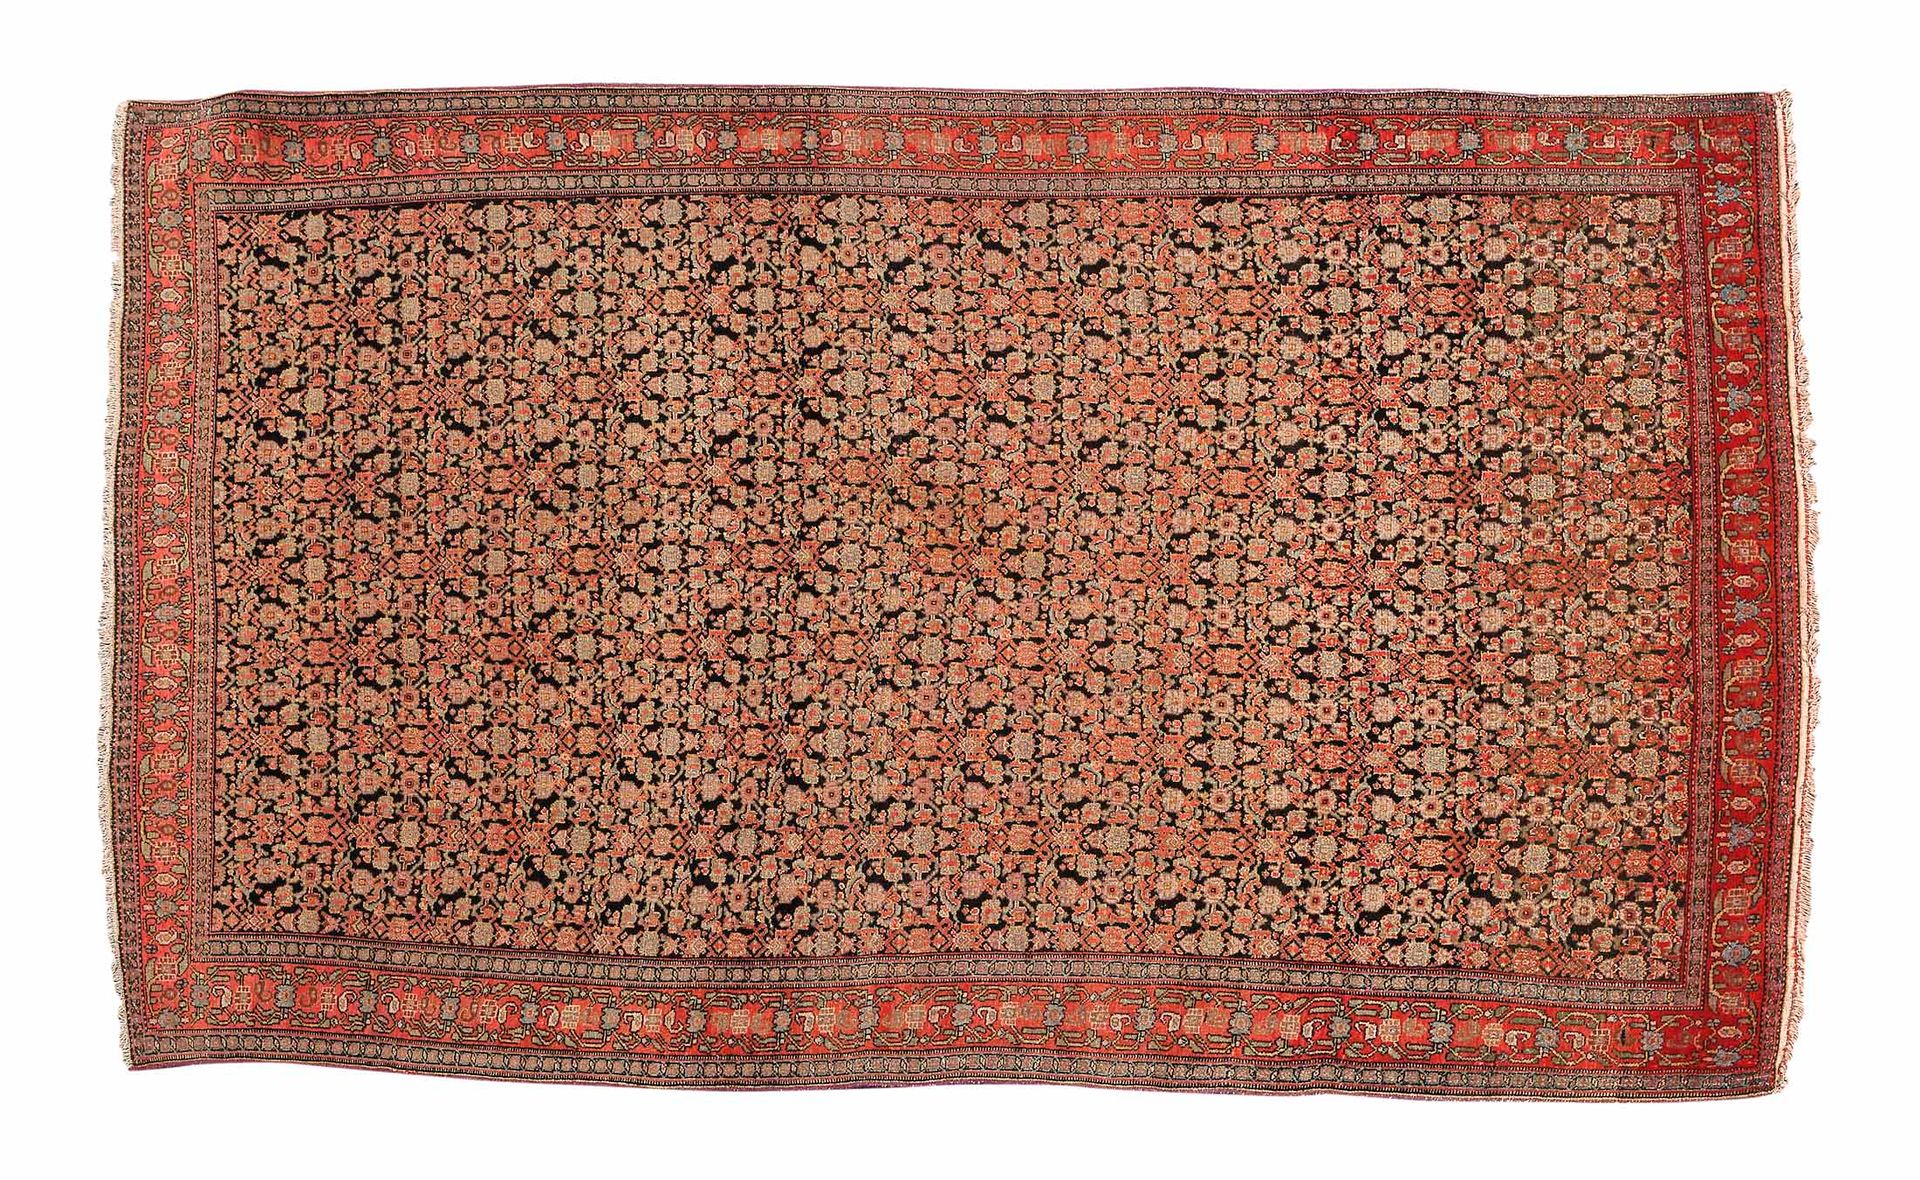 Null Very fine SENNEH carpet (Persia), end of the 19th century

Dimensions : 200&hellip;